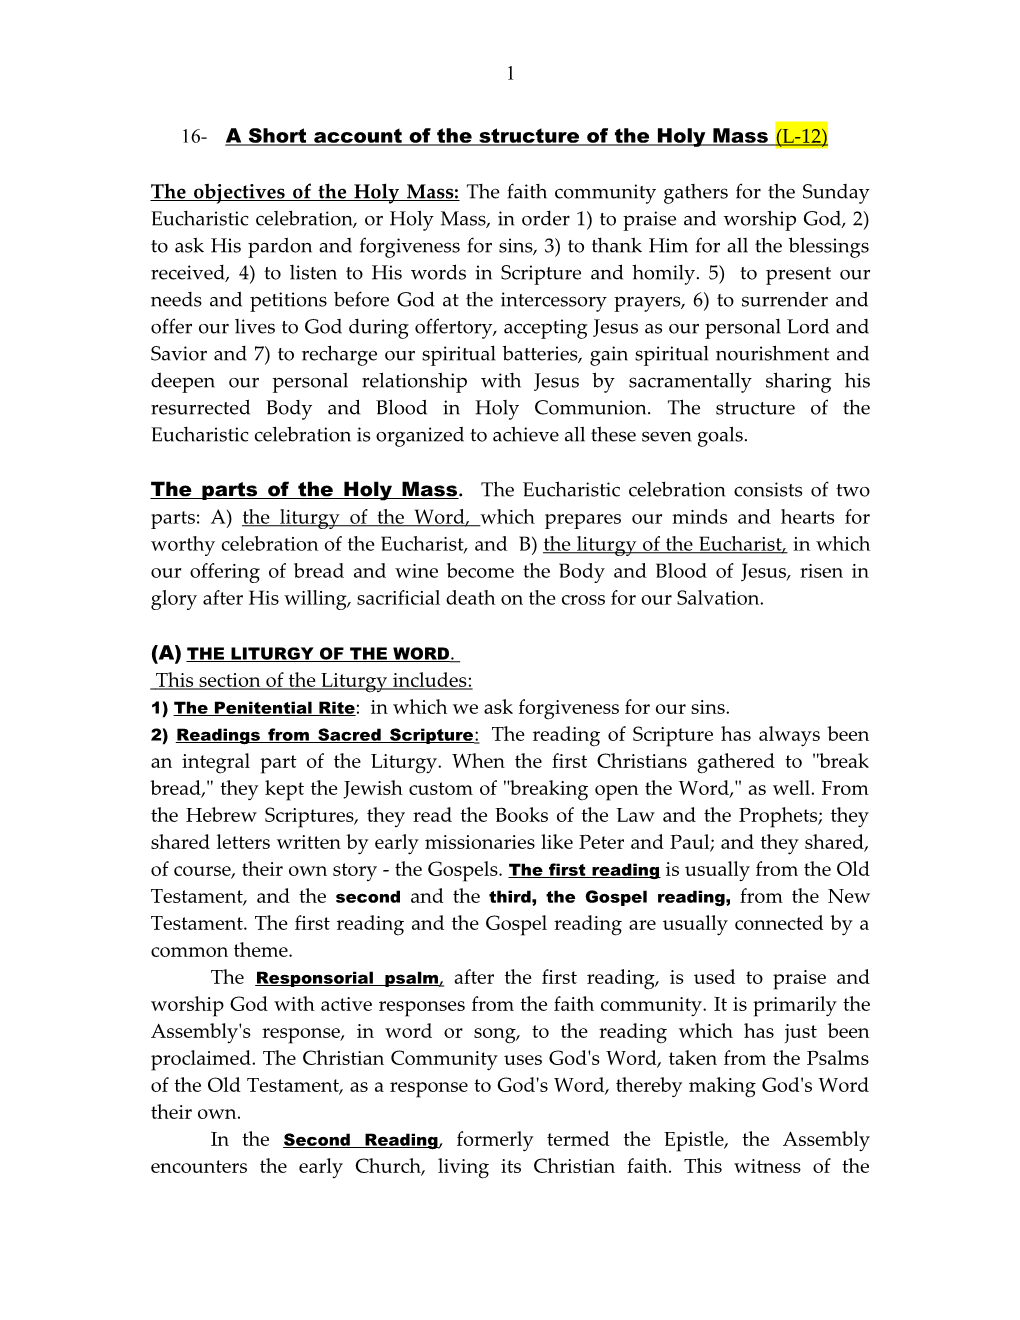 16-A Short Account of the Structure of the Holy Mass (L-12)